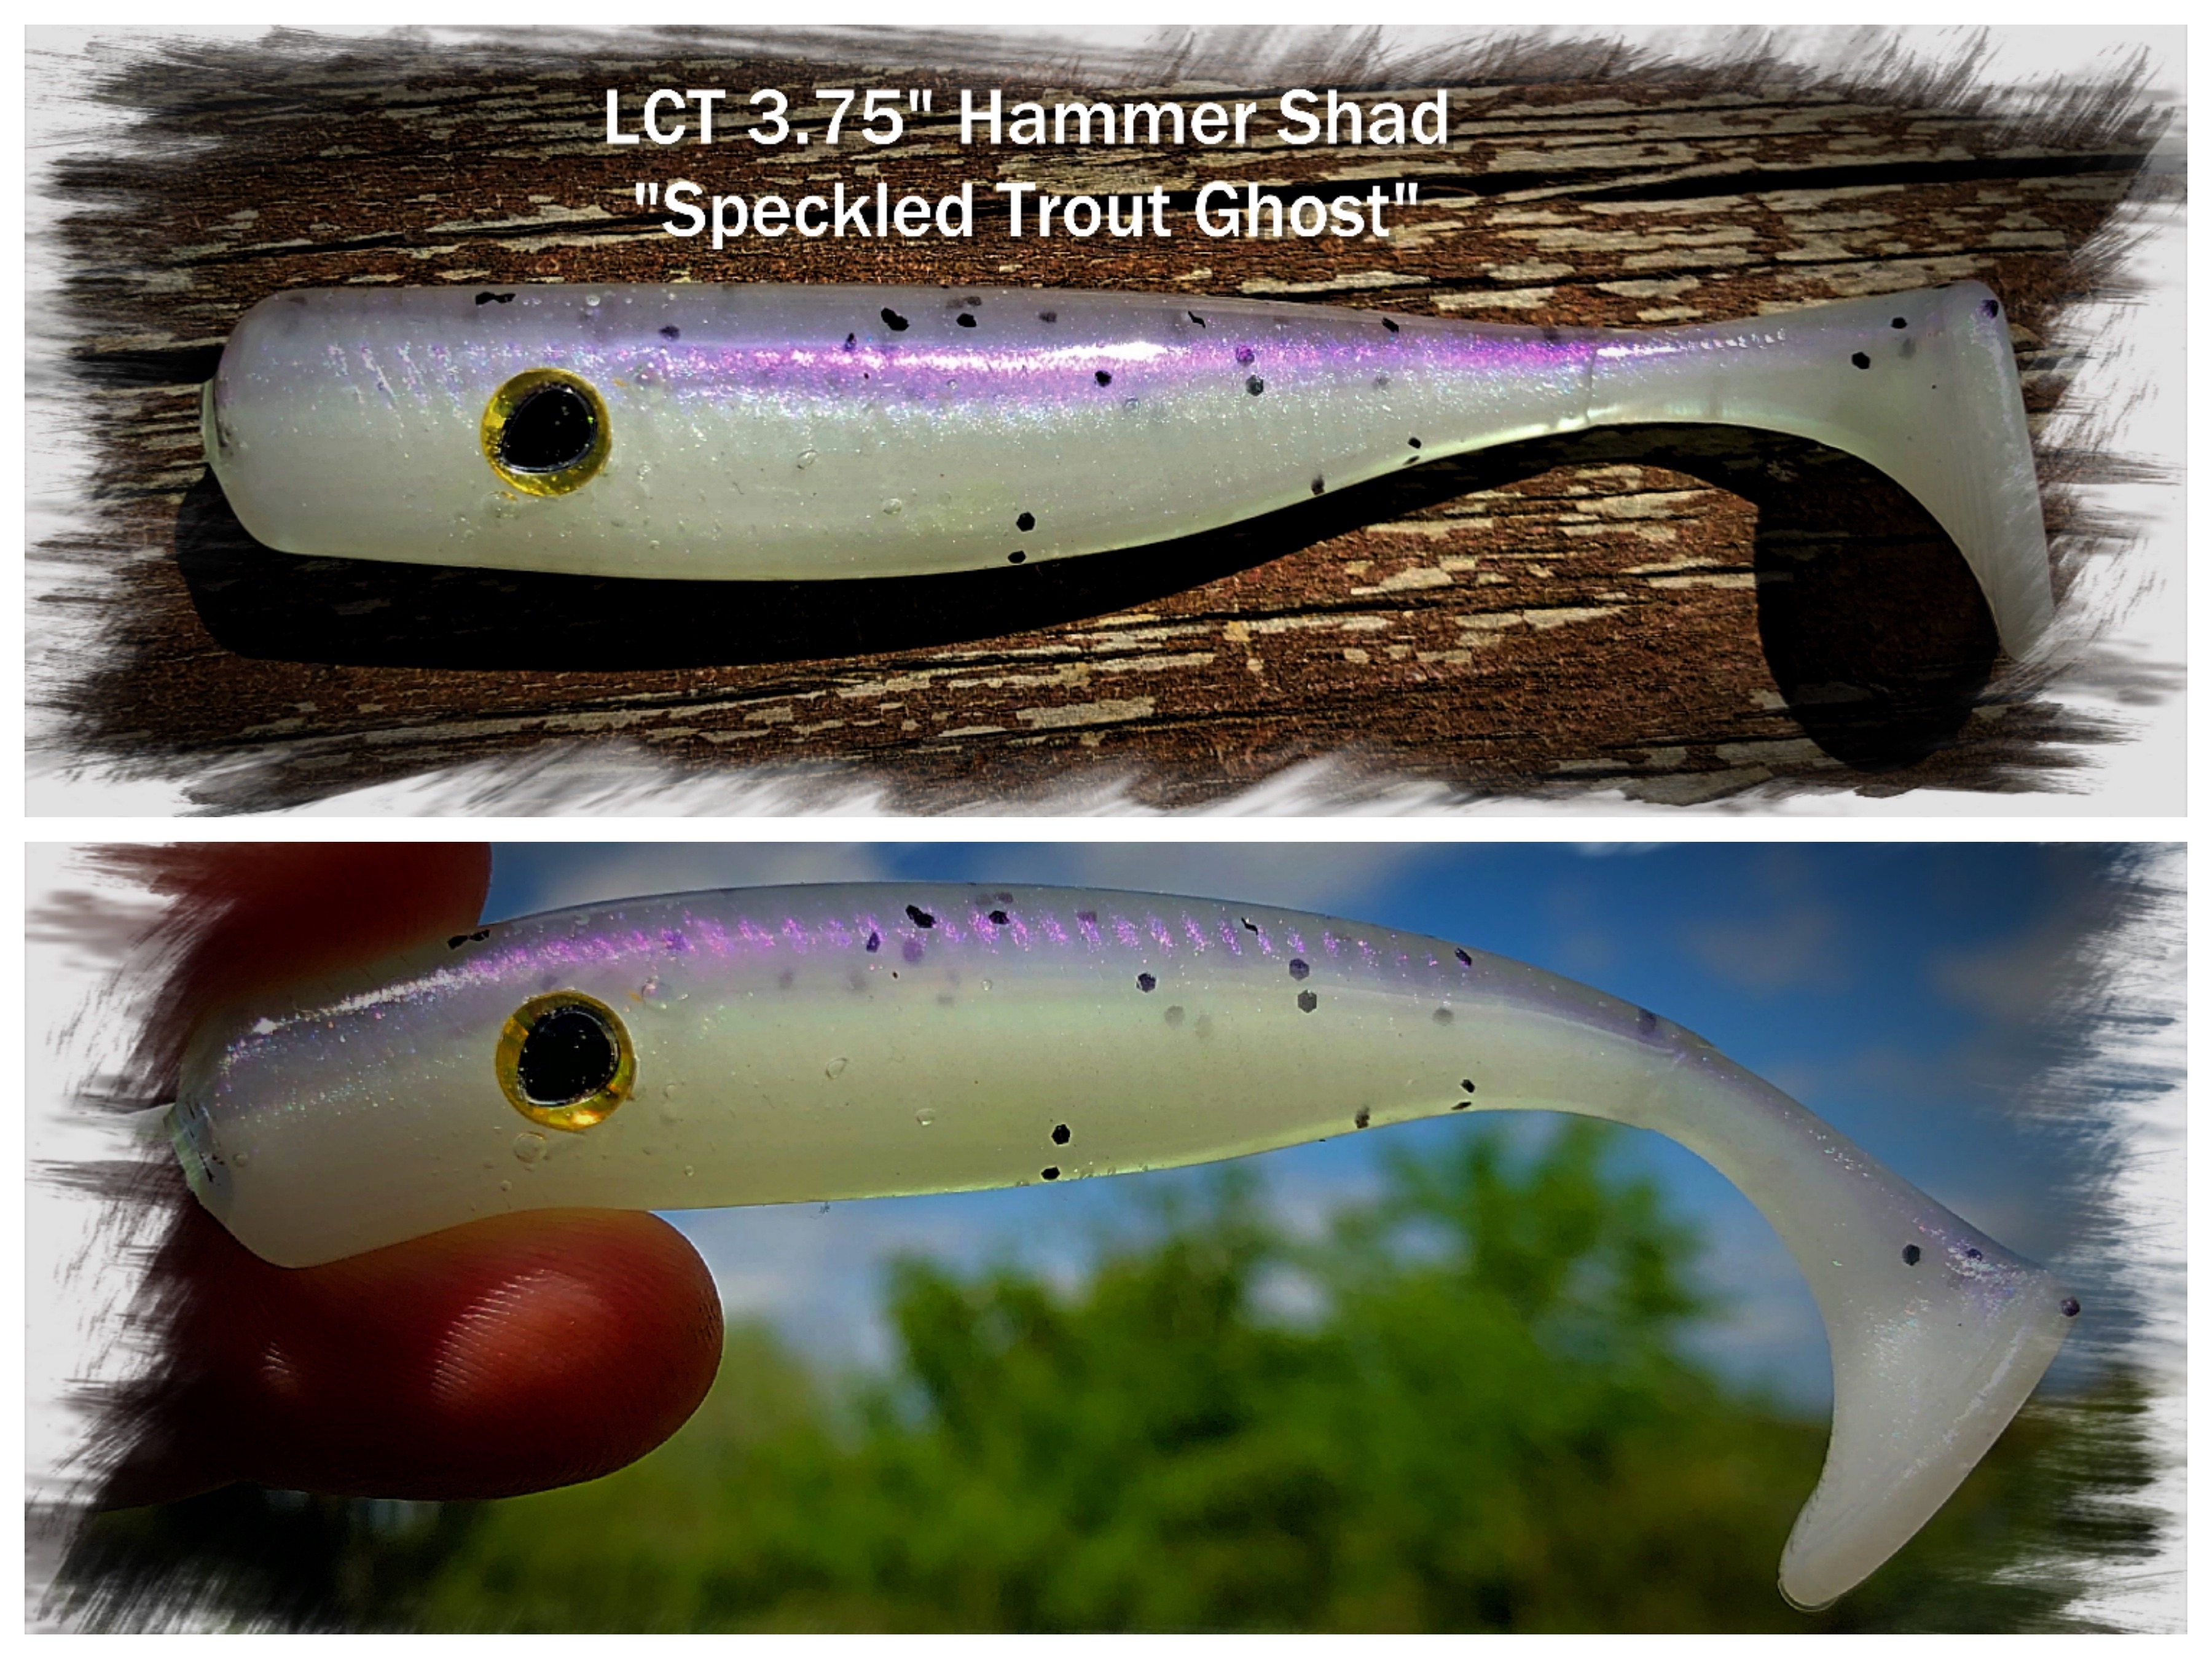 https://legacycustomtackle.com/wp-content/uploads/2019/04/LCT-3.75-Hammer-Shad-Speckled-Trout-Ghost-PRODUCT-PIC.jpg